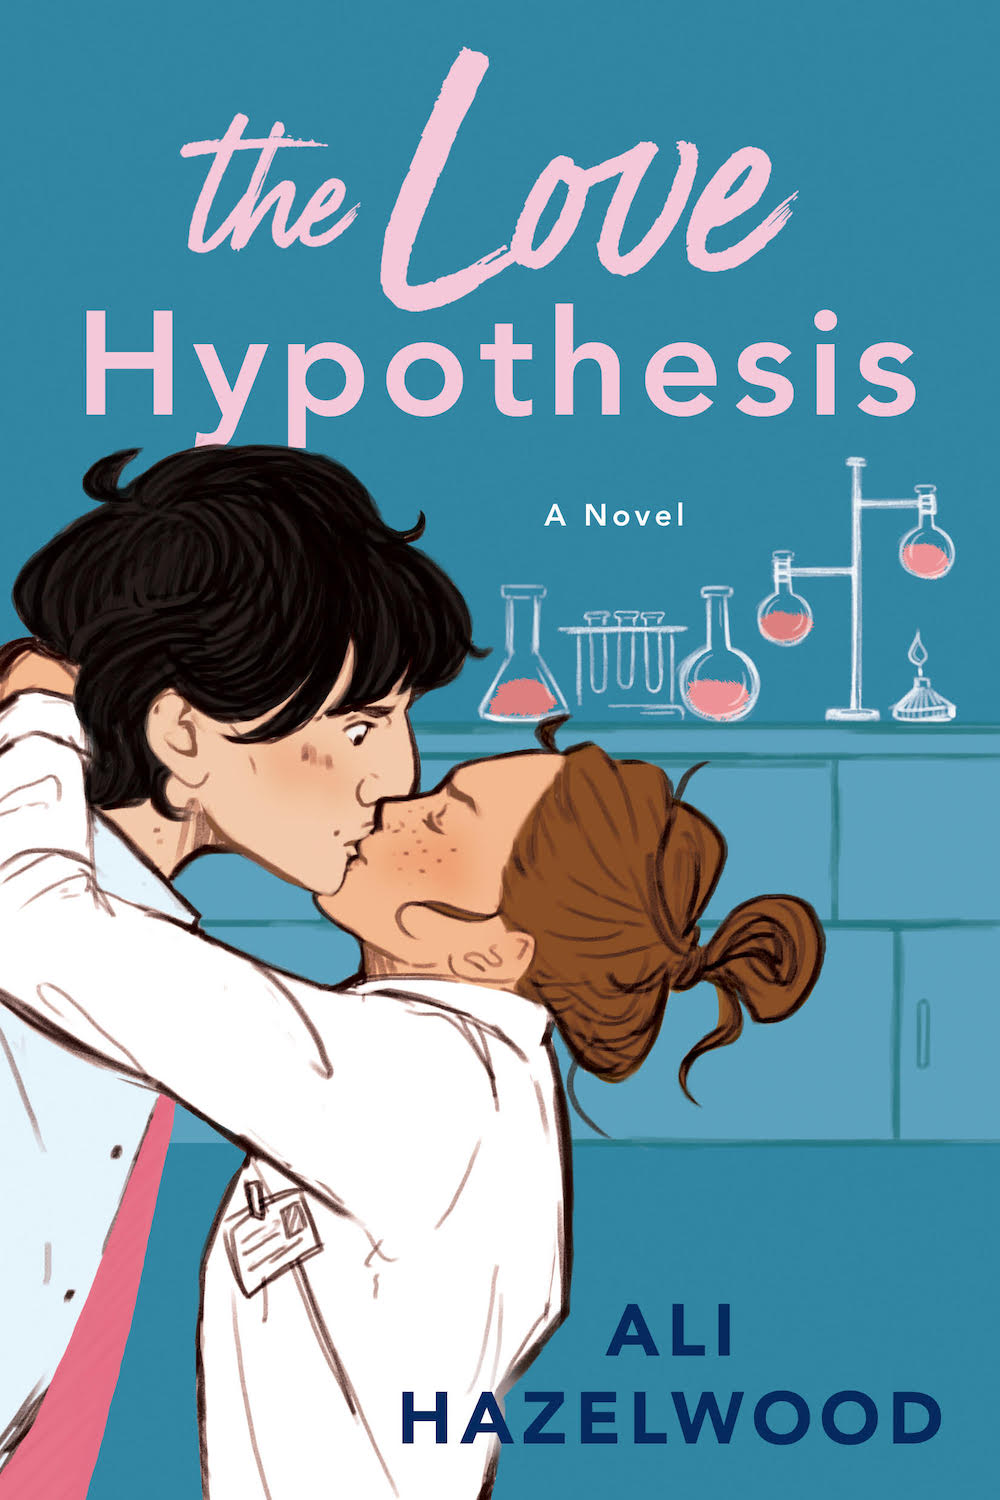 the love hypothesis hypothesis